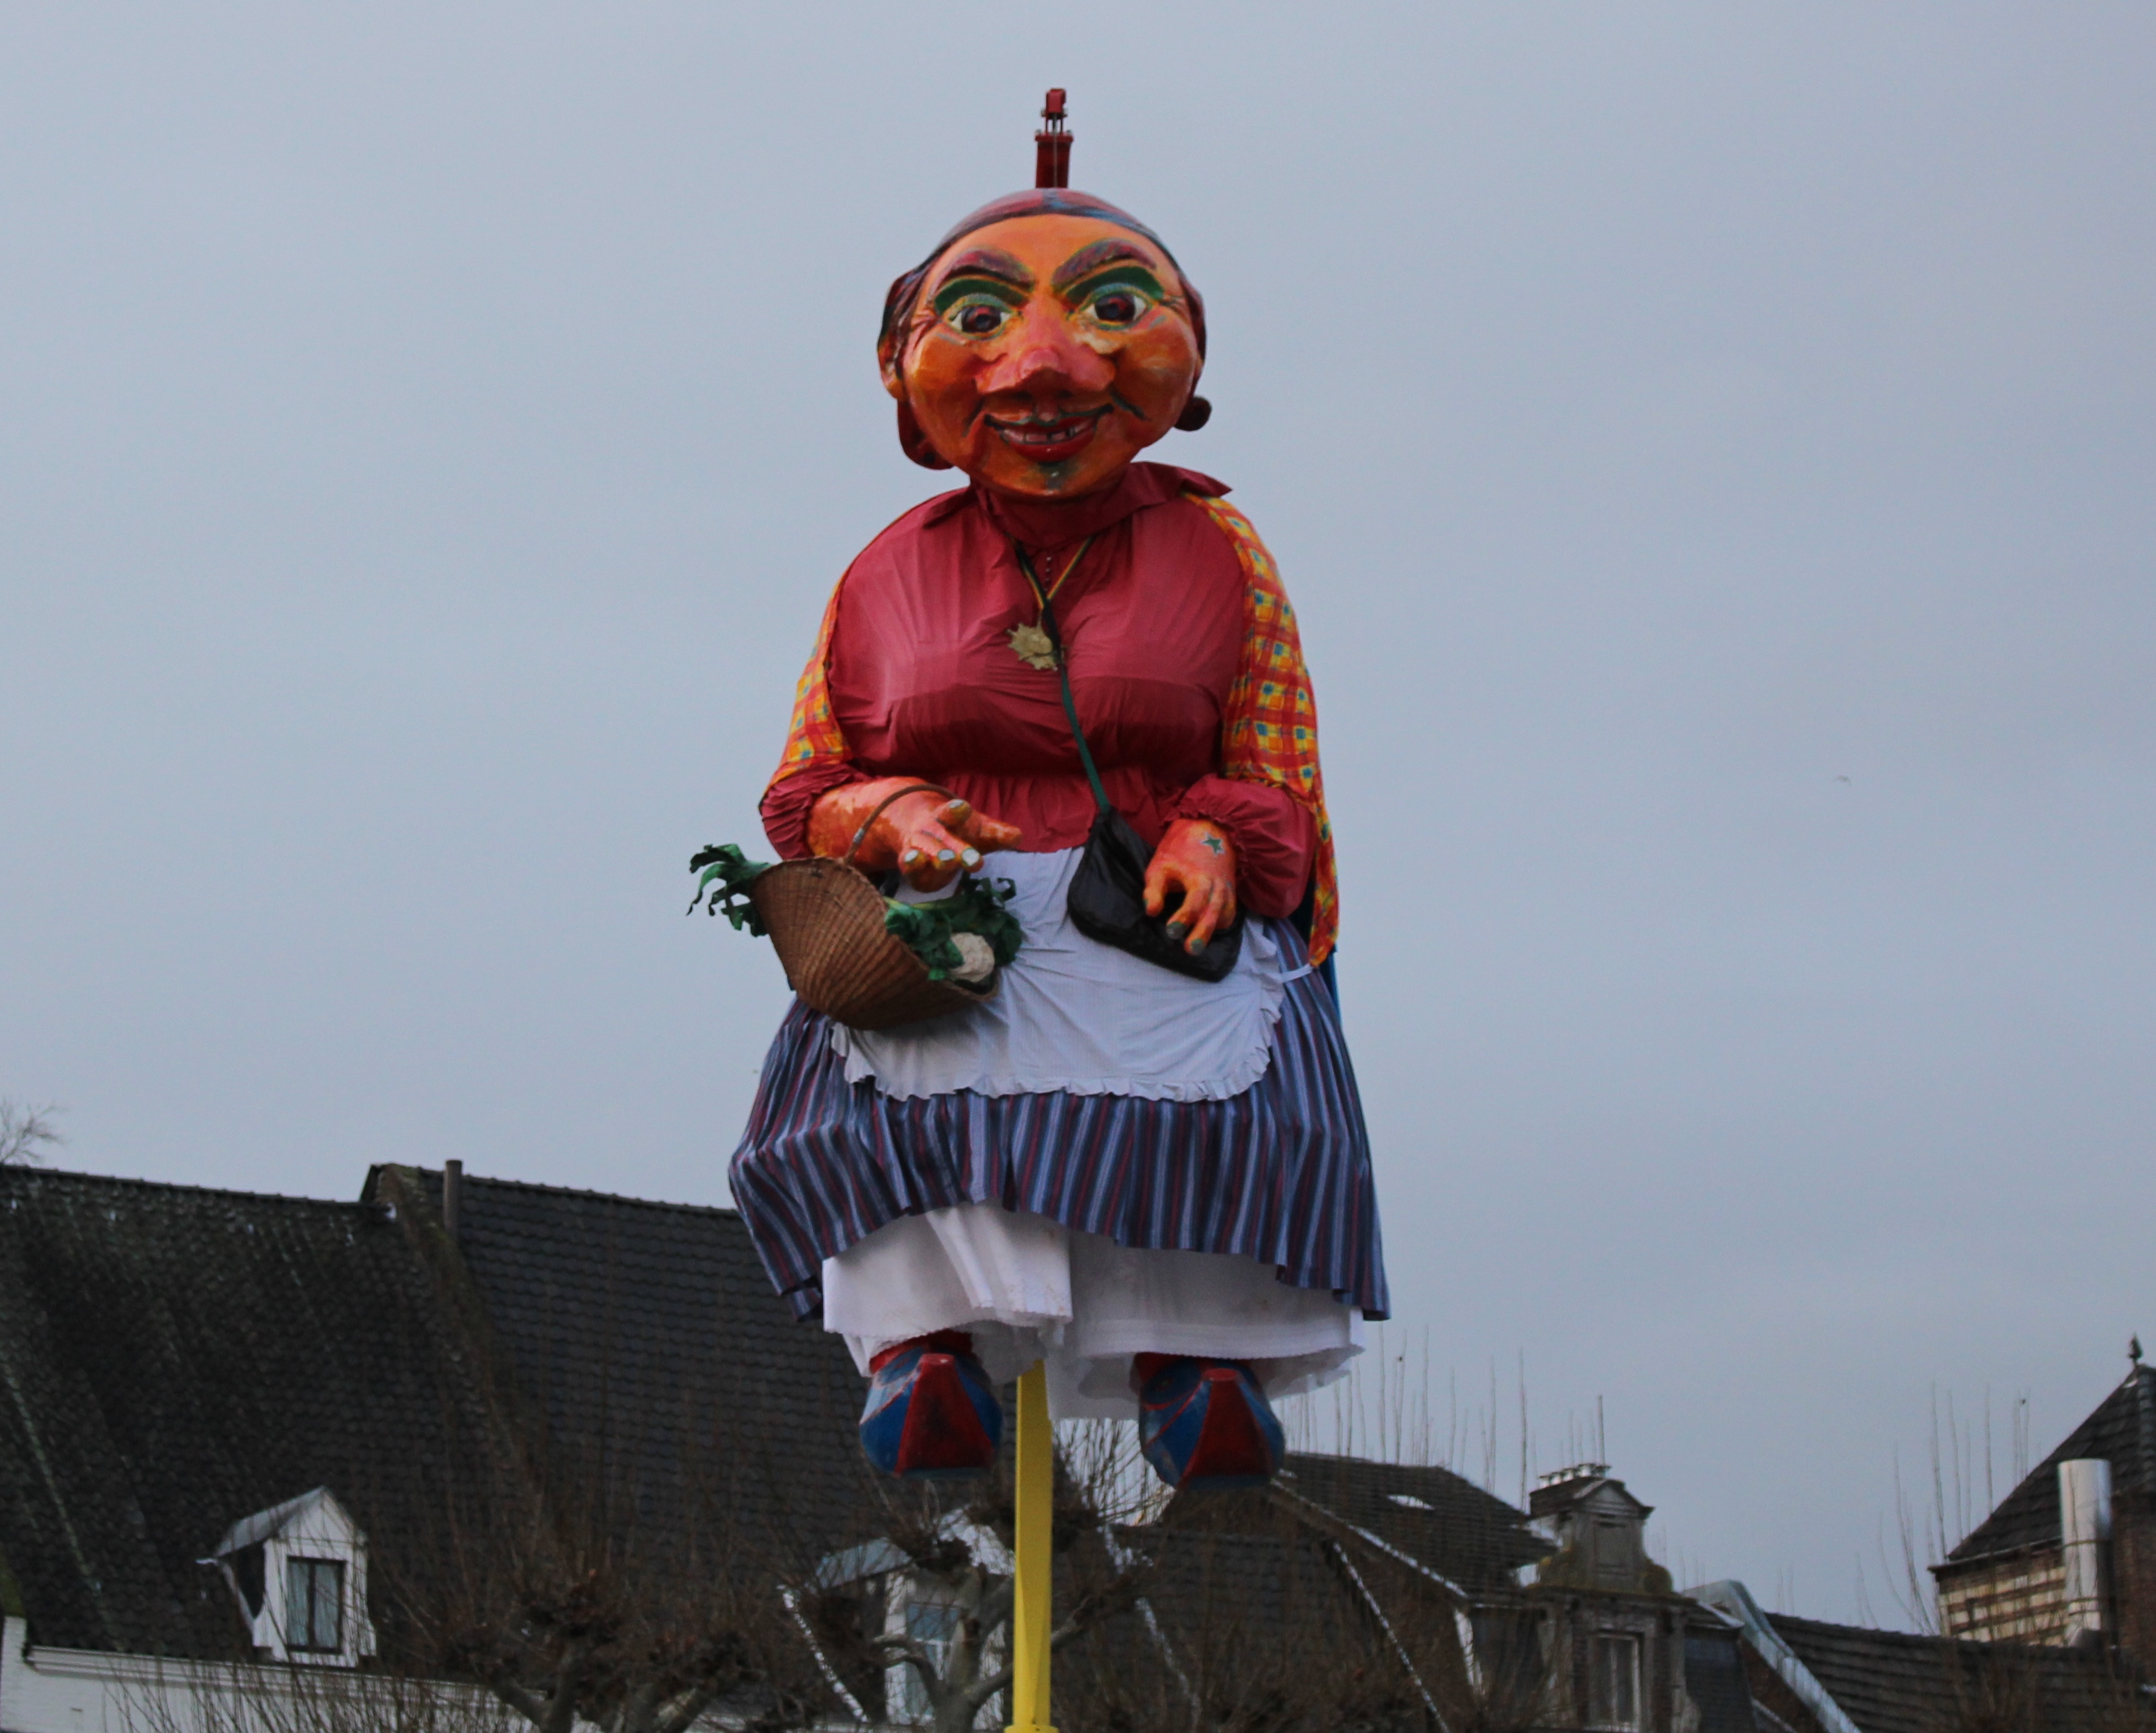 The Mooswief, hung up during Carnival on the Vrijthof.